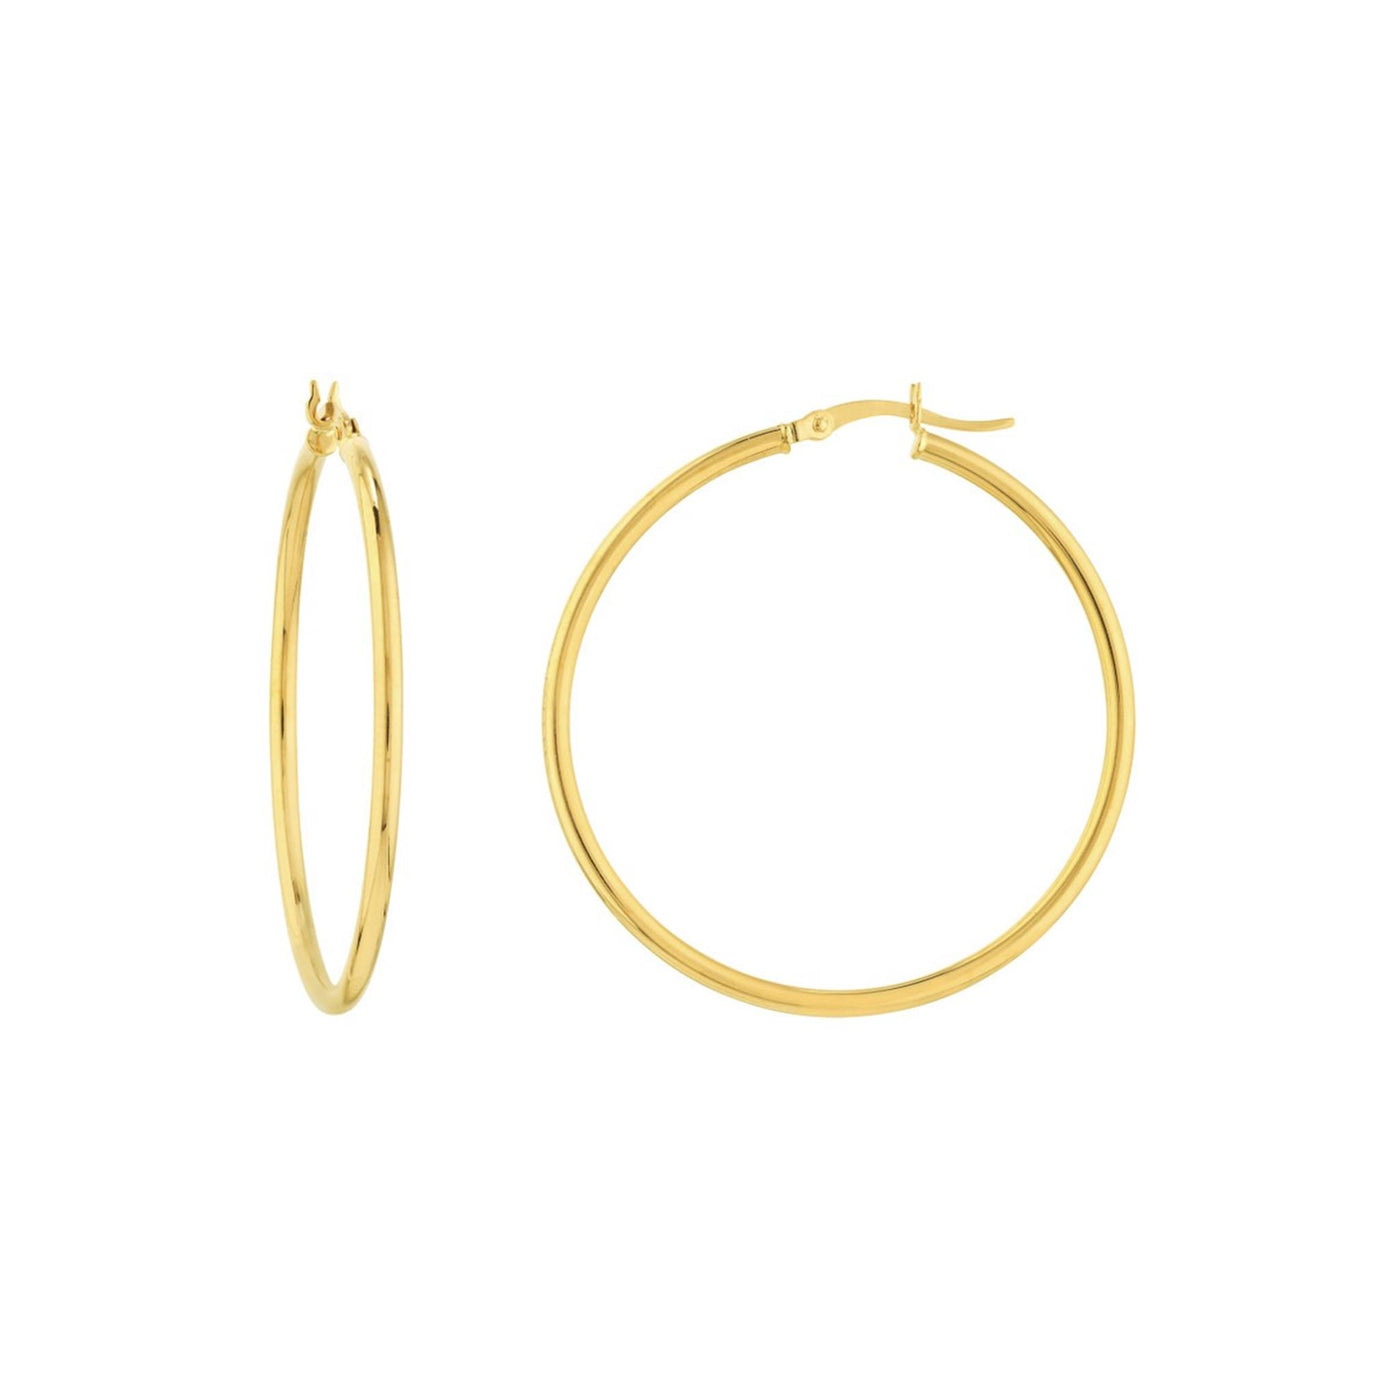 14K Yellow Gold 2mm x 40mm Round Tube Design Round Hoop Style Earrings